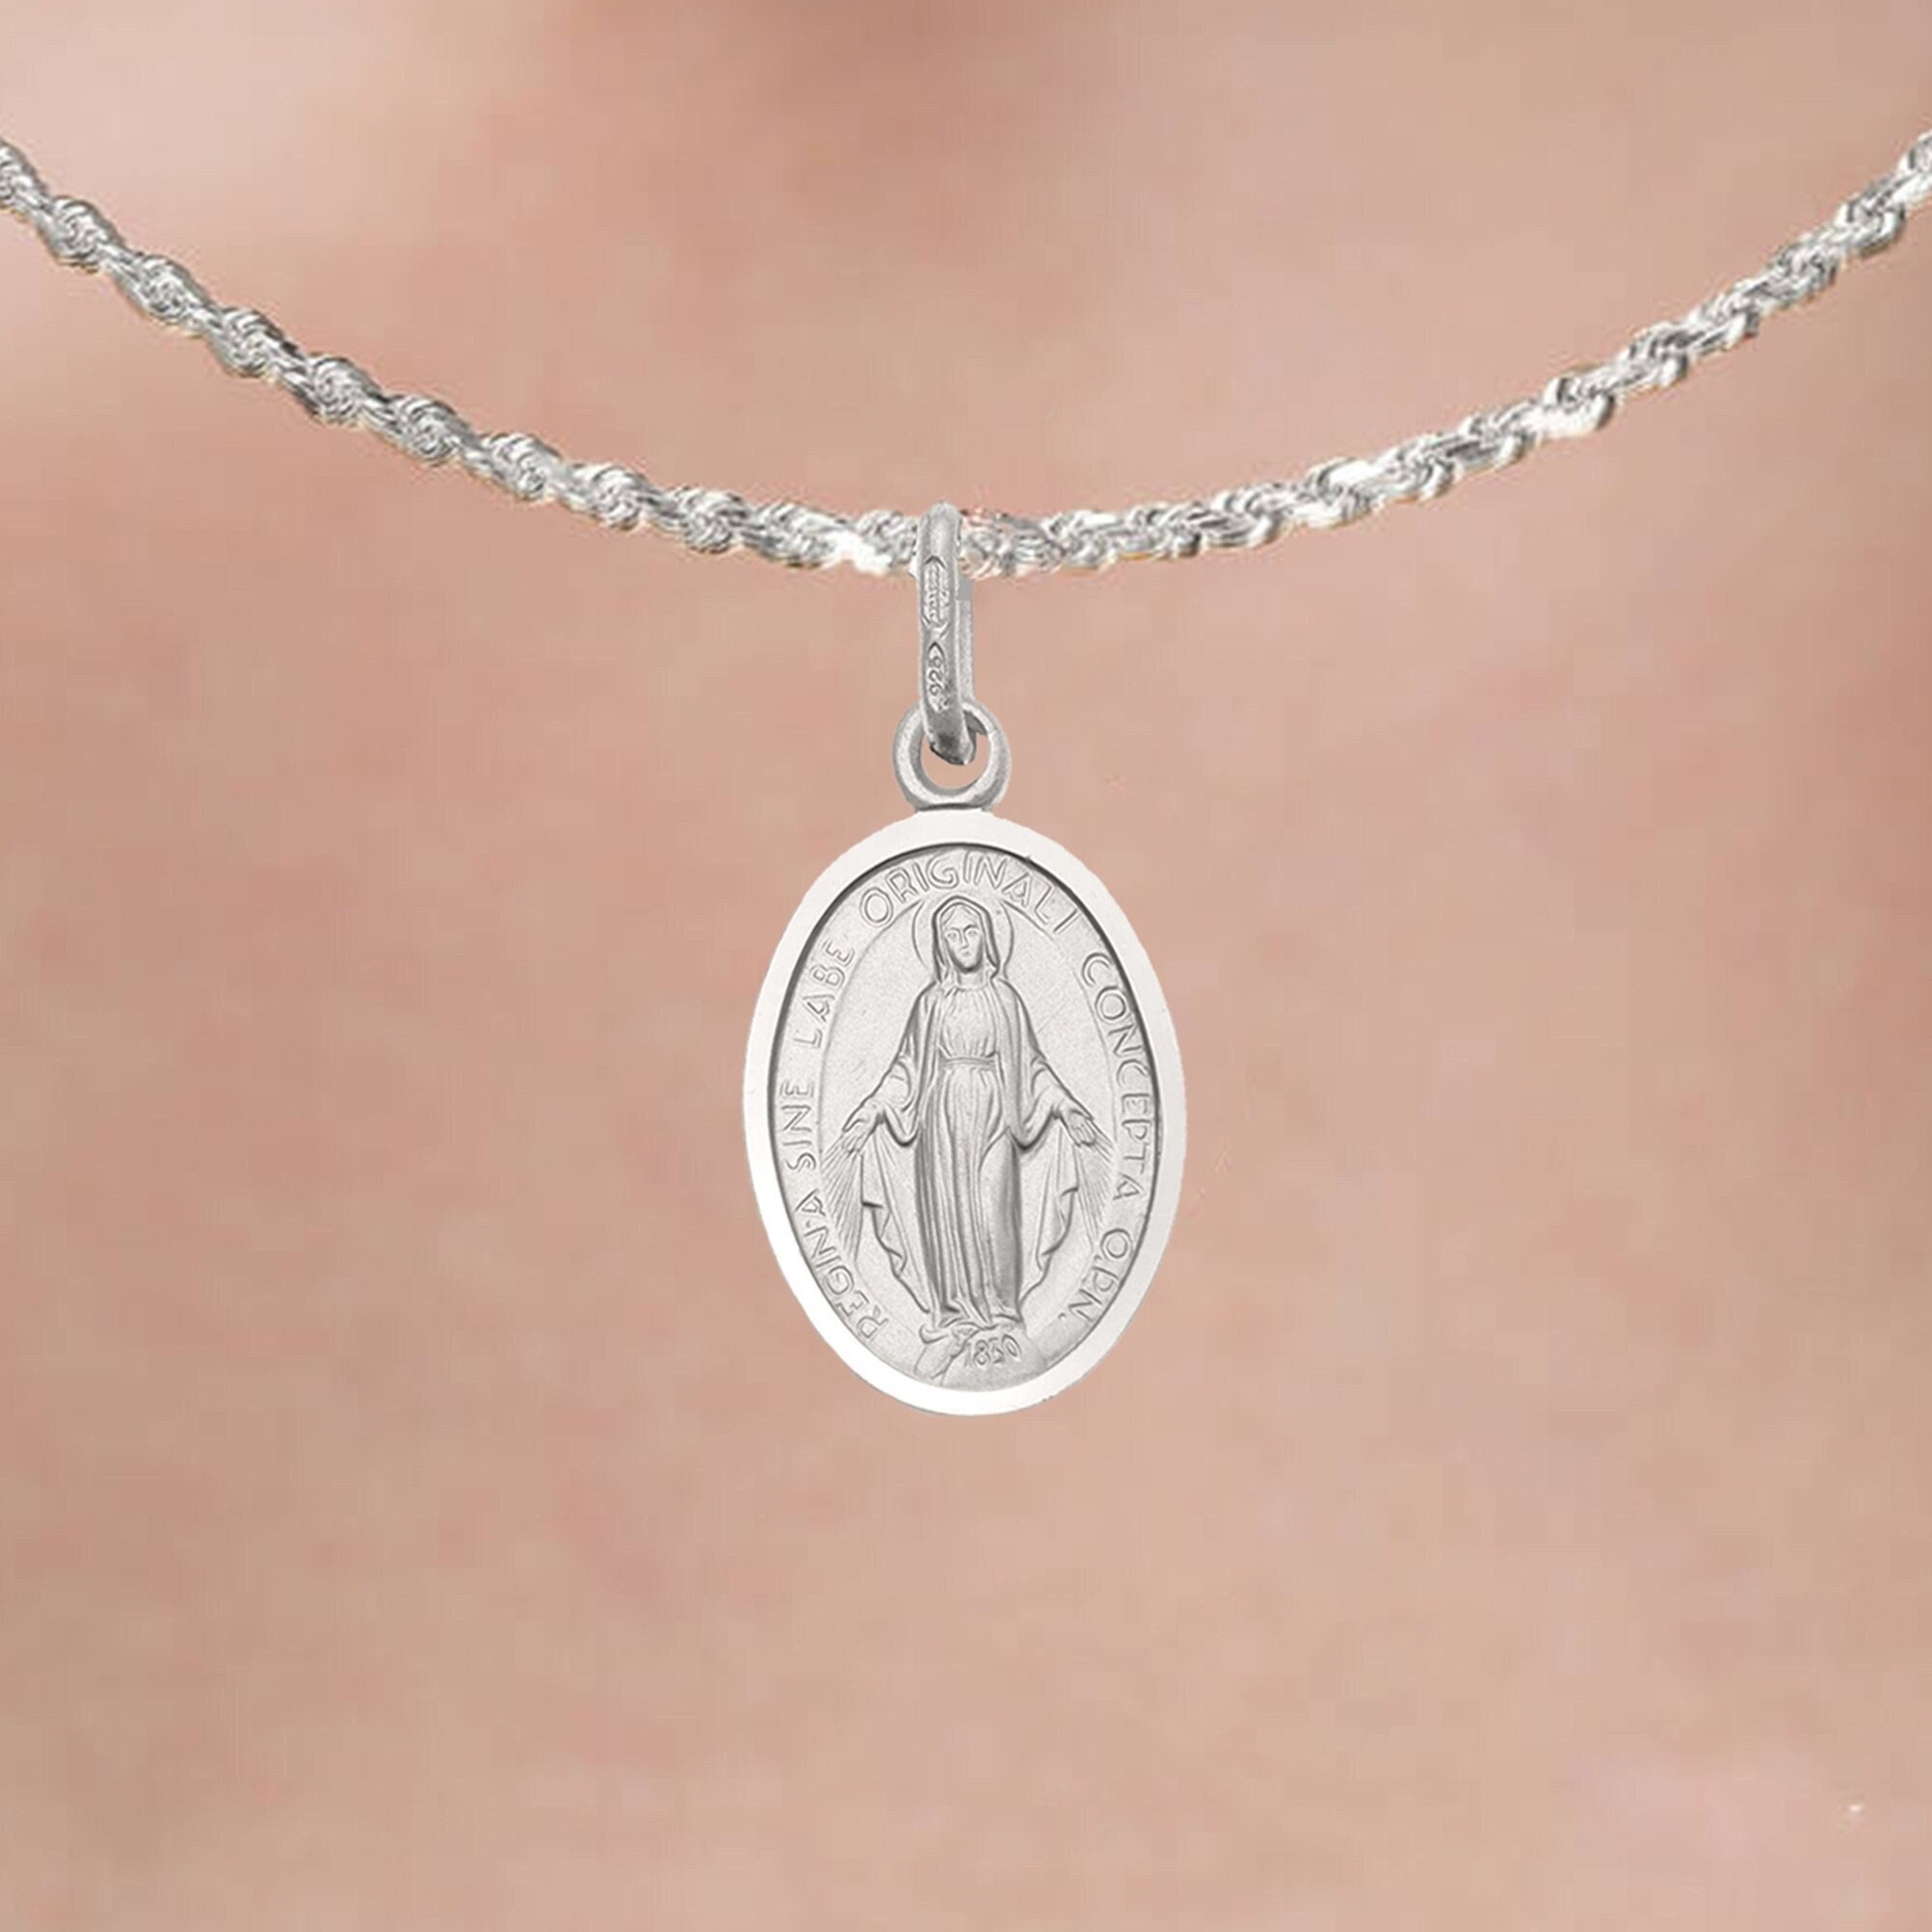 Sofiya Leone Virgin Sex Video - Miraculous Medal Necklace in Sterling Silver Double Sided - Etsy